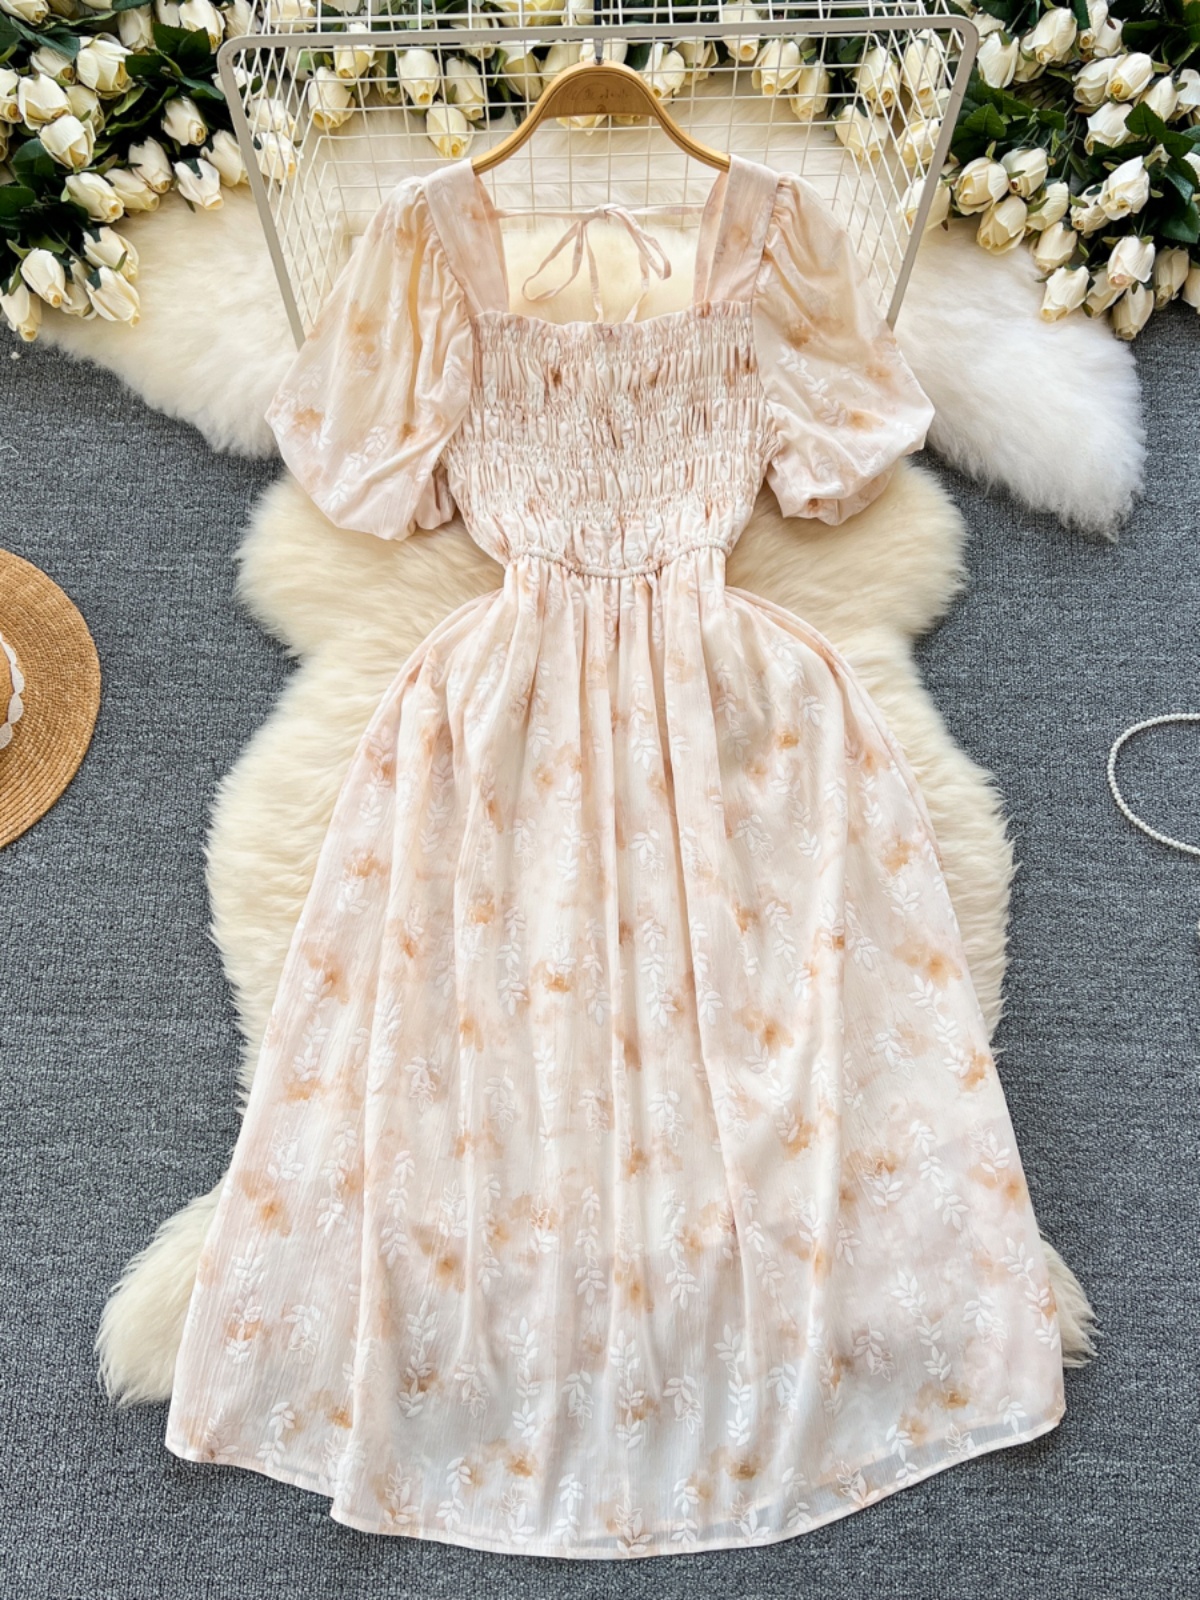 French Bubble Sleeves Dress for Women's Summer New Sweet Heart Machine Hollow Lacing Waist for Slimming and Elegant Fragmented Flower Dress